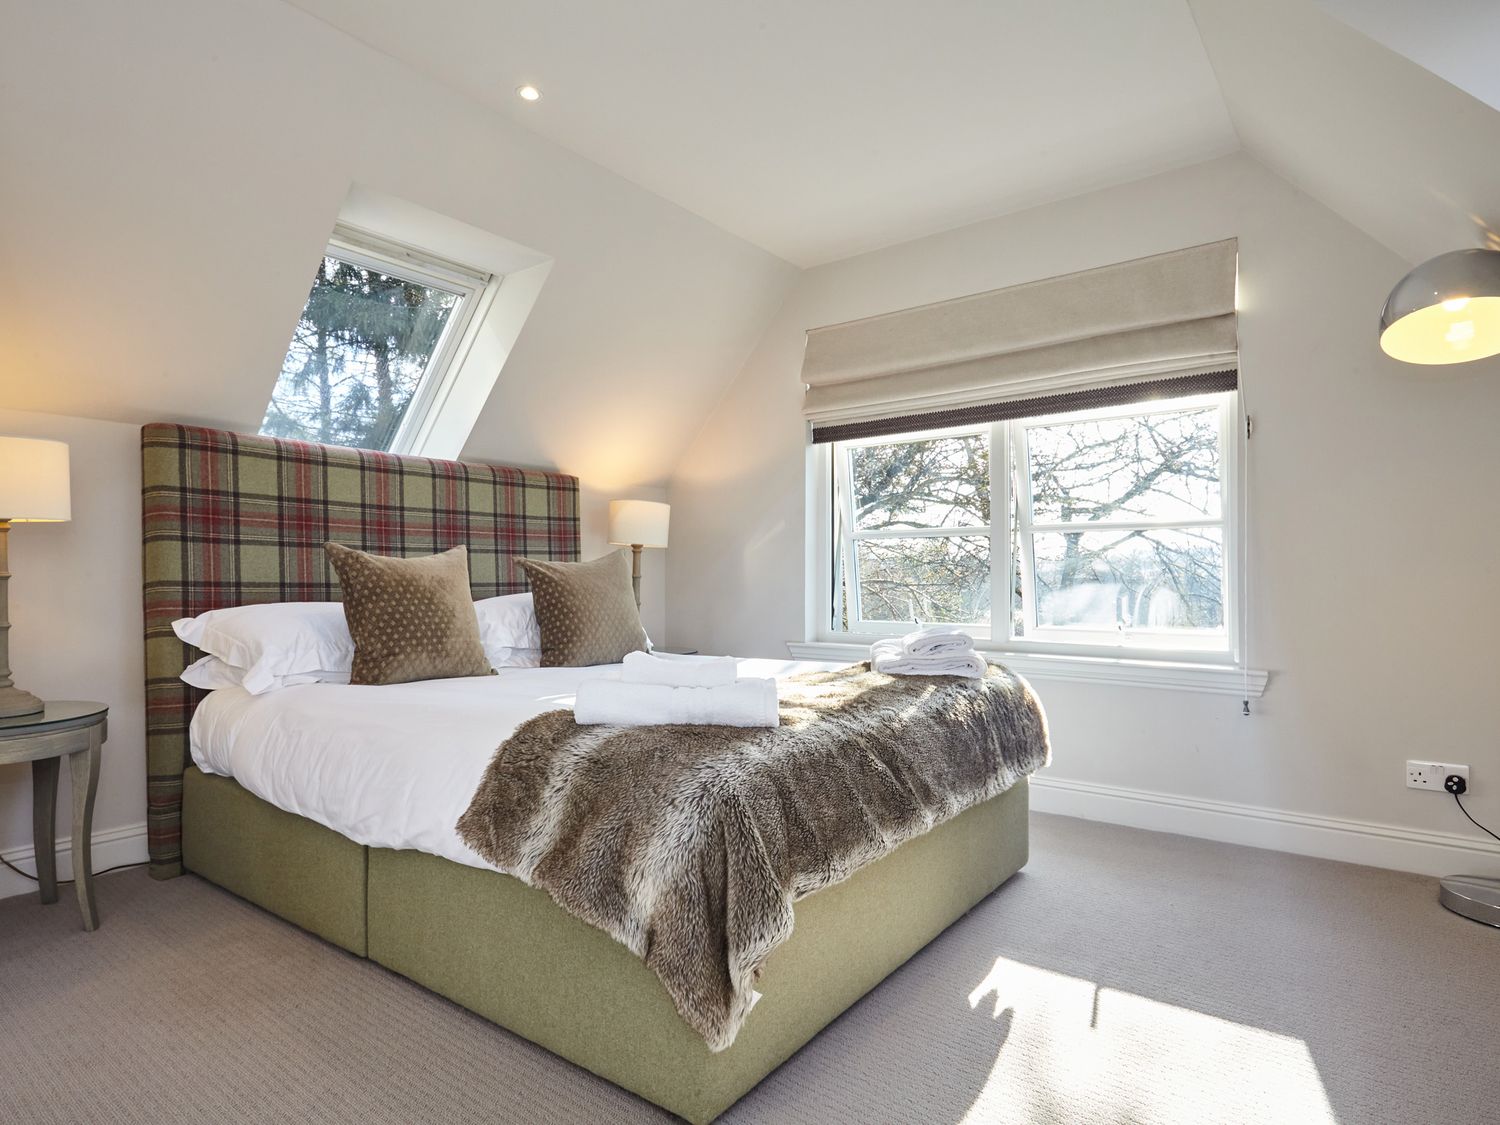 The Indie House, Crieff